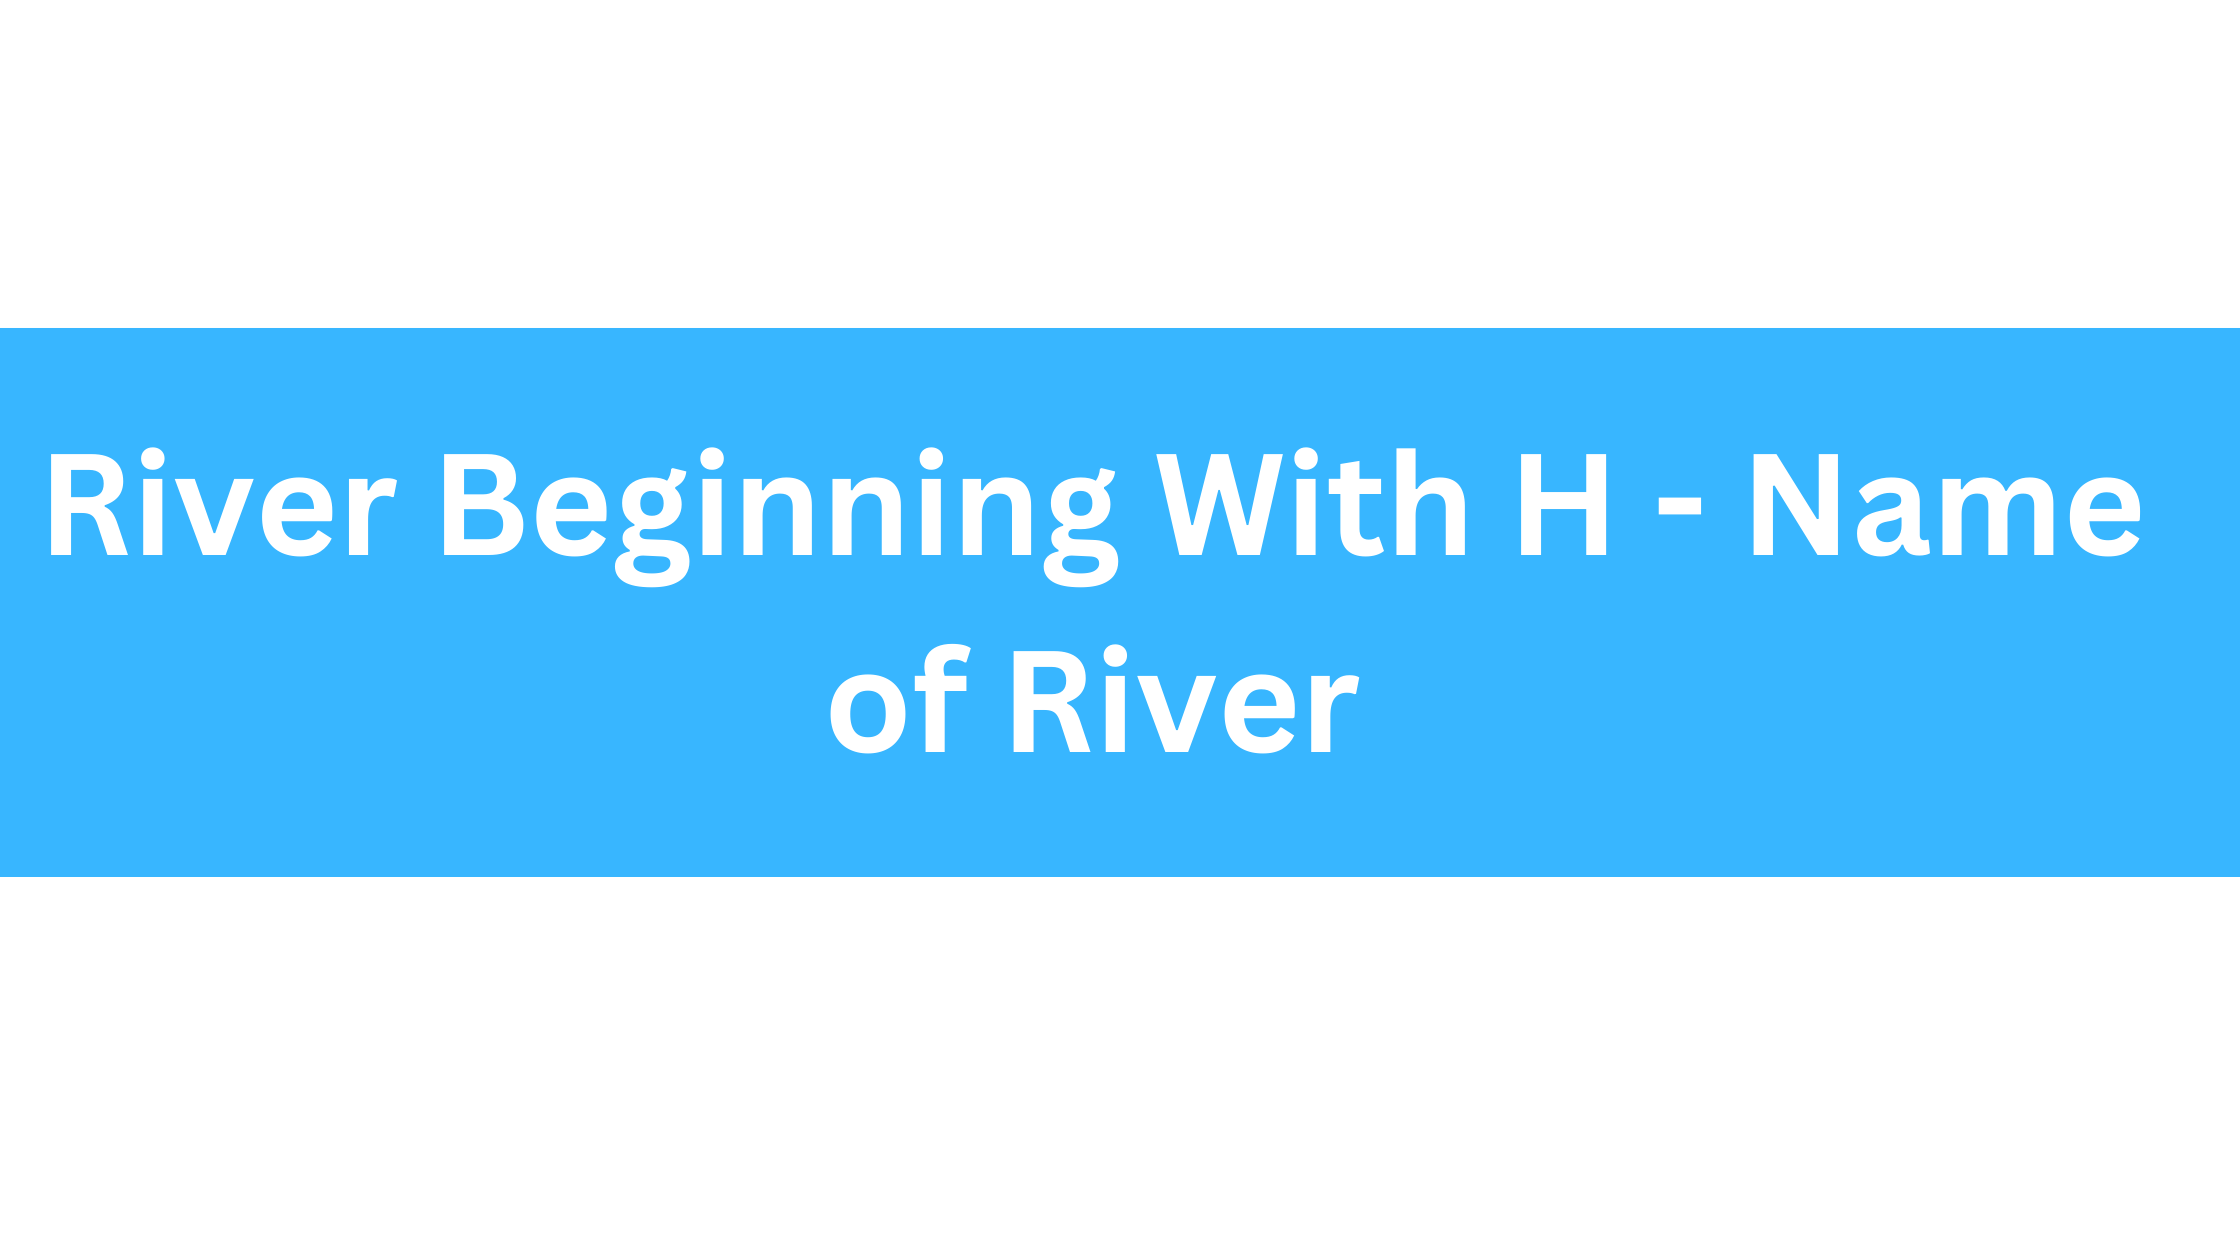 River Beginning With H